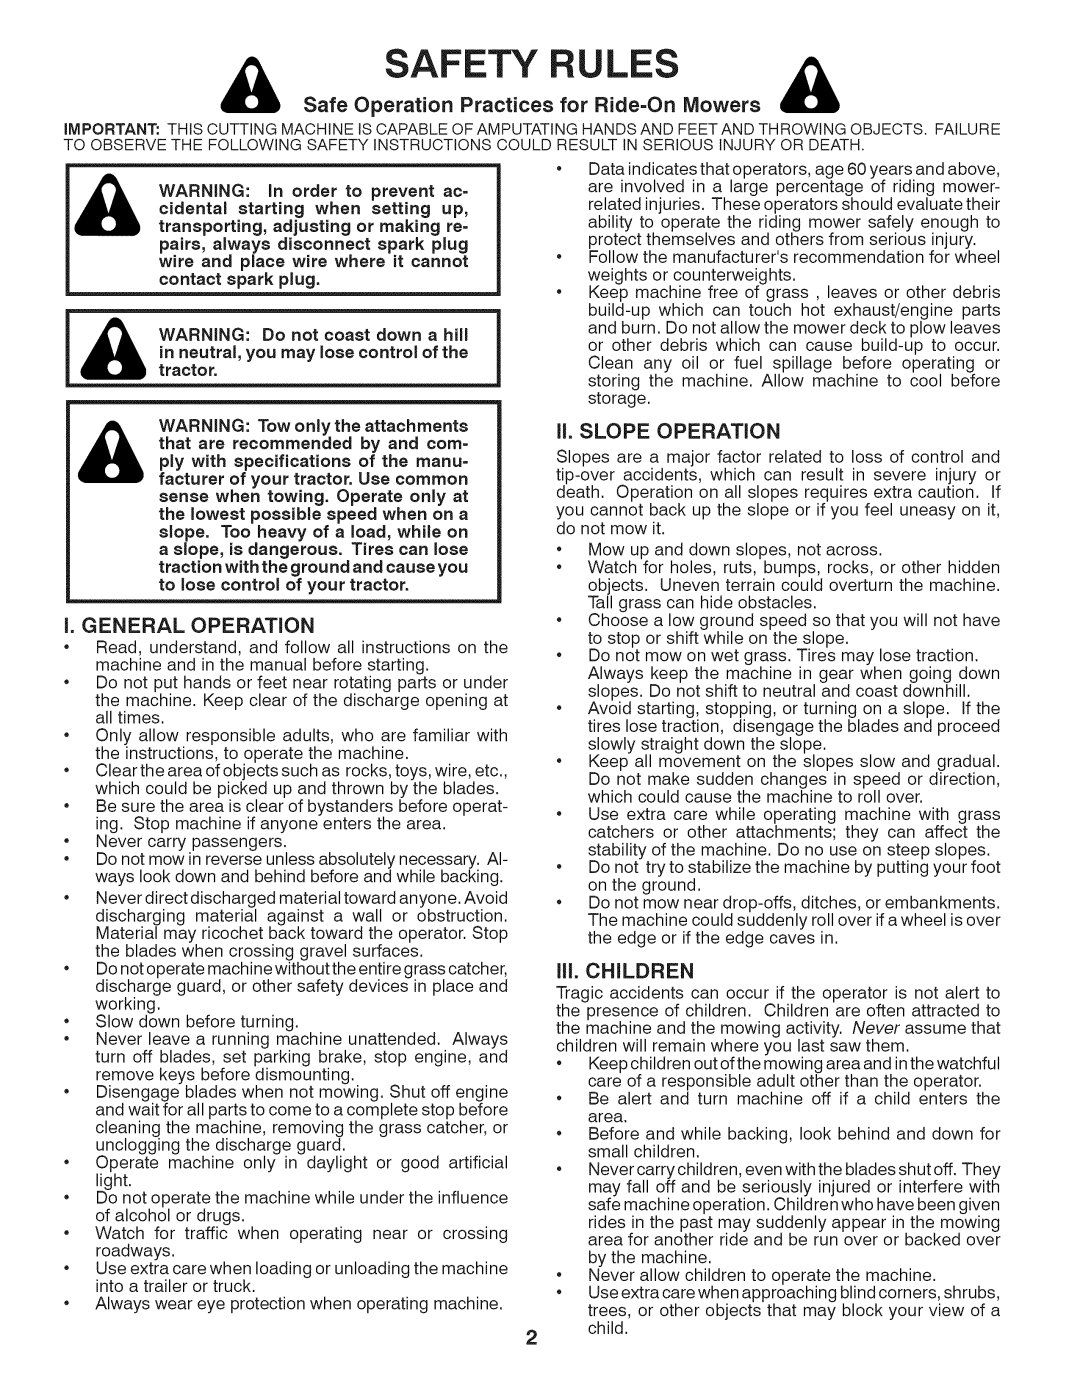 Craftsman 917.24903 Safety Rules, Safe Operation Practices for Ride=On Mowers, I. General Operation, Ii. Slope Operation 